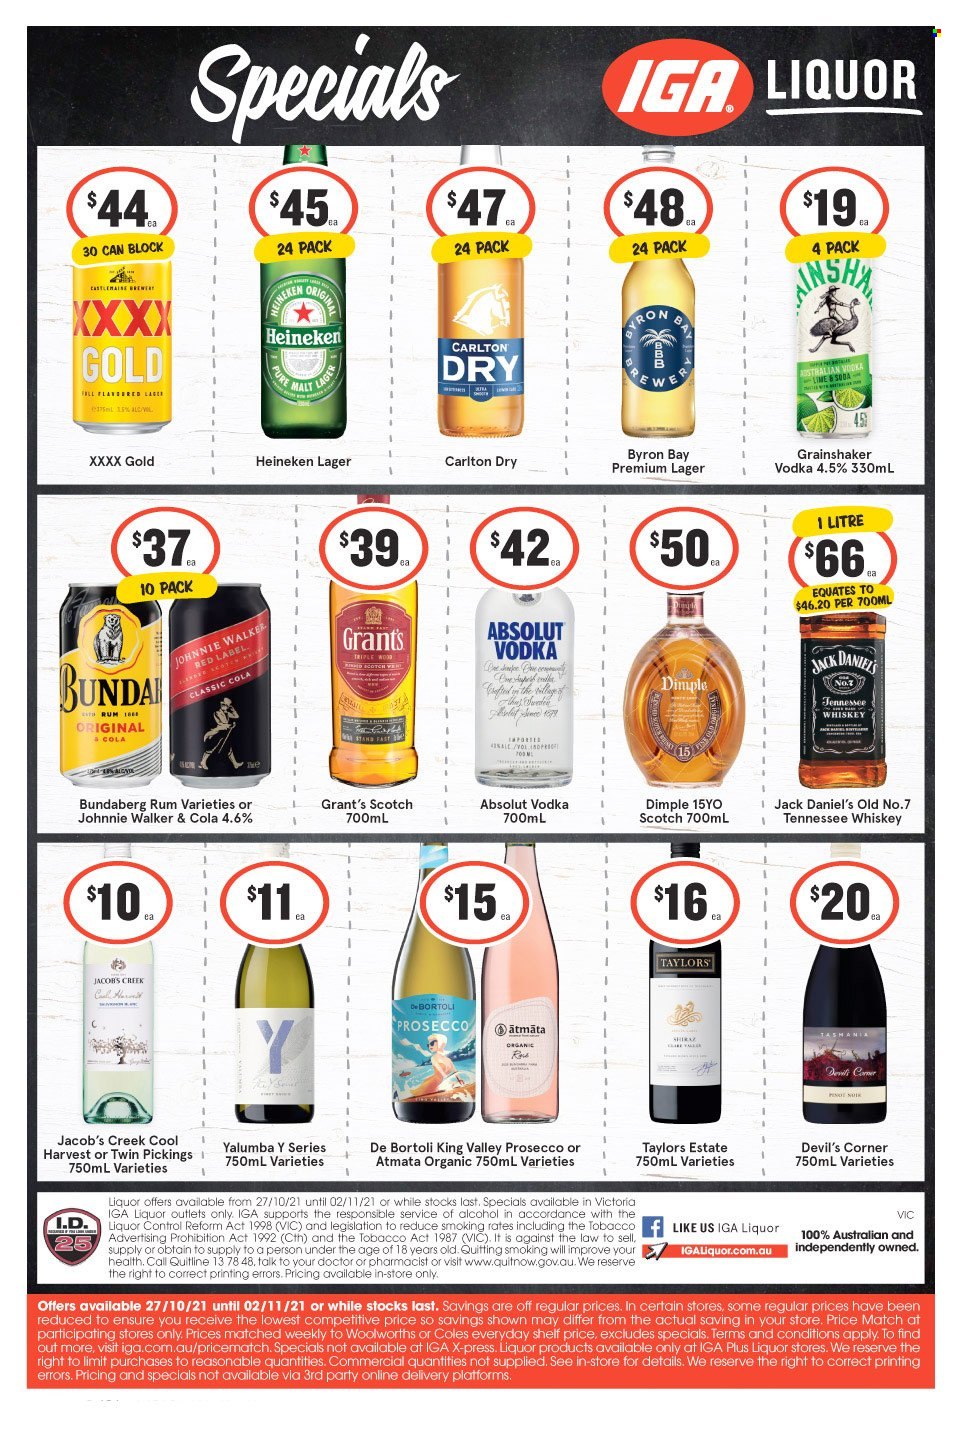 thumbnail - IGA LIQUOR Catalogue - 27 Oct 2021 - 2 Nov 2021 - Sales products - prosecco, Jacob's Creek, rum, Tennessee Whiskey, vodka, whiskey, Jack Daniel's, Johnnie Walker, Grant's, Absolut, Ron Pelicano, Bundaberg, whisky, beer, Heineken, Lager. Page 1.